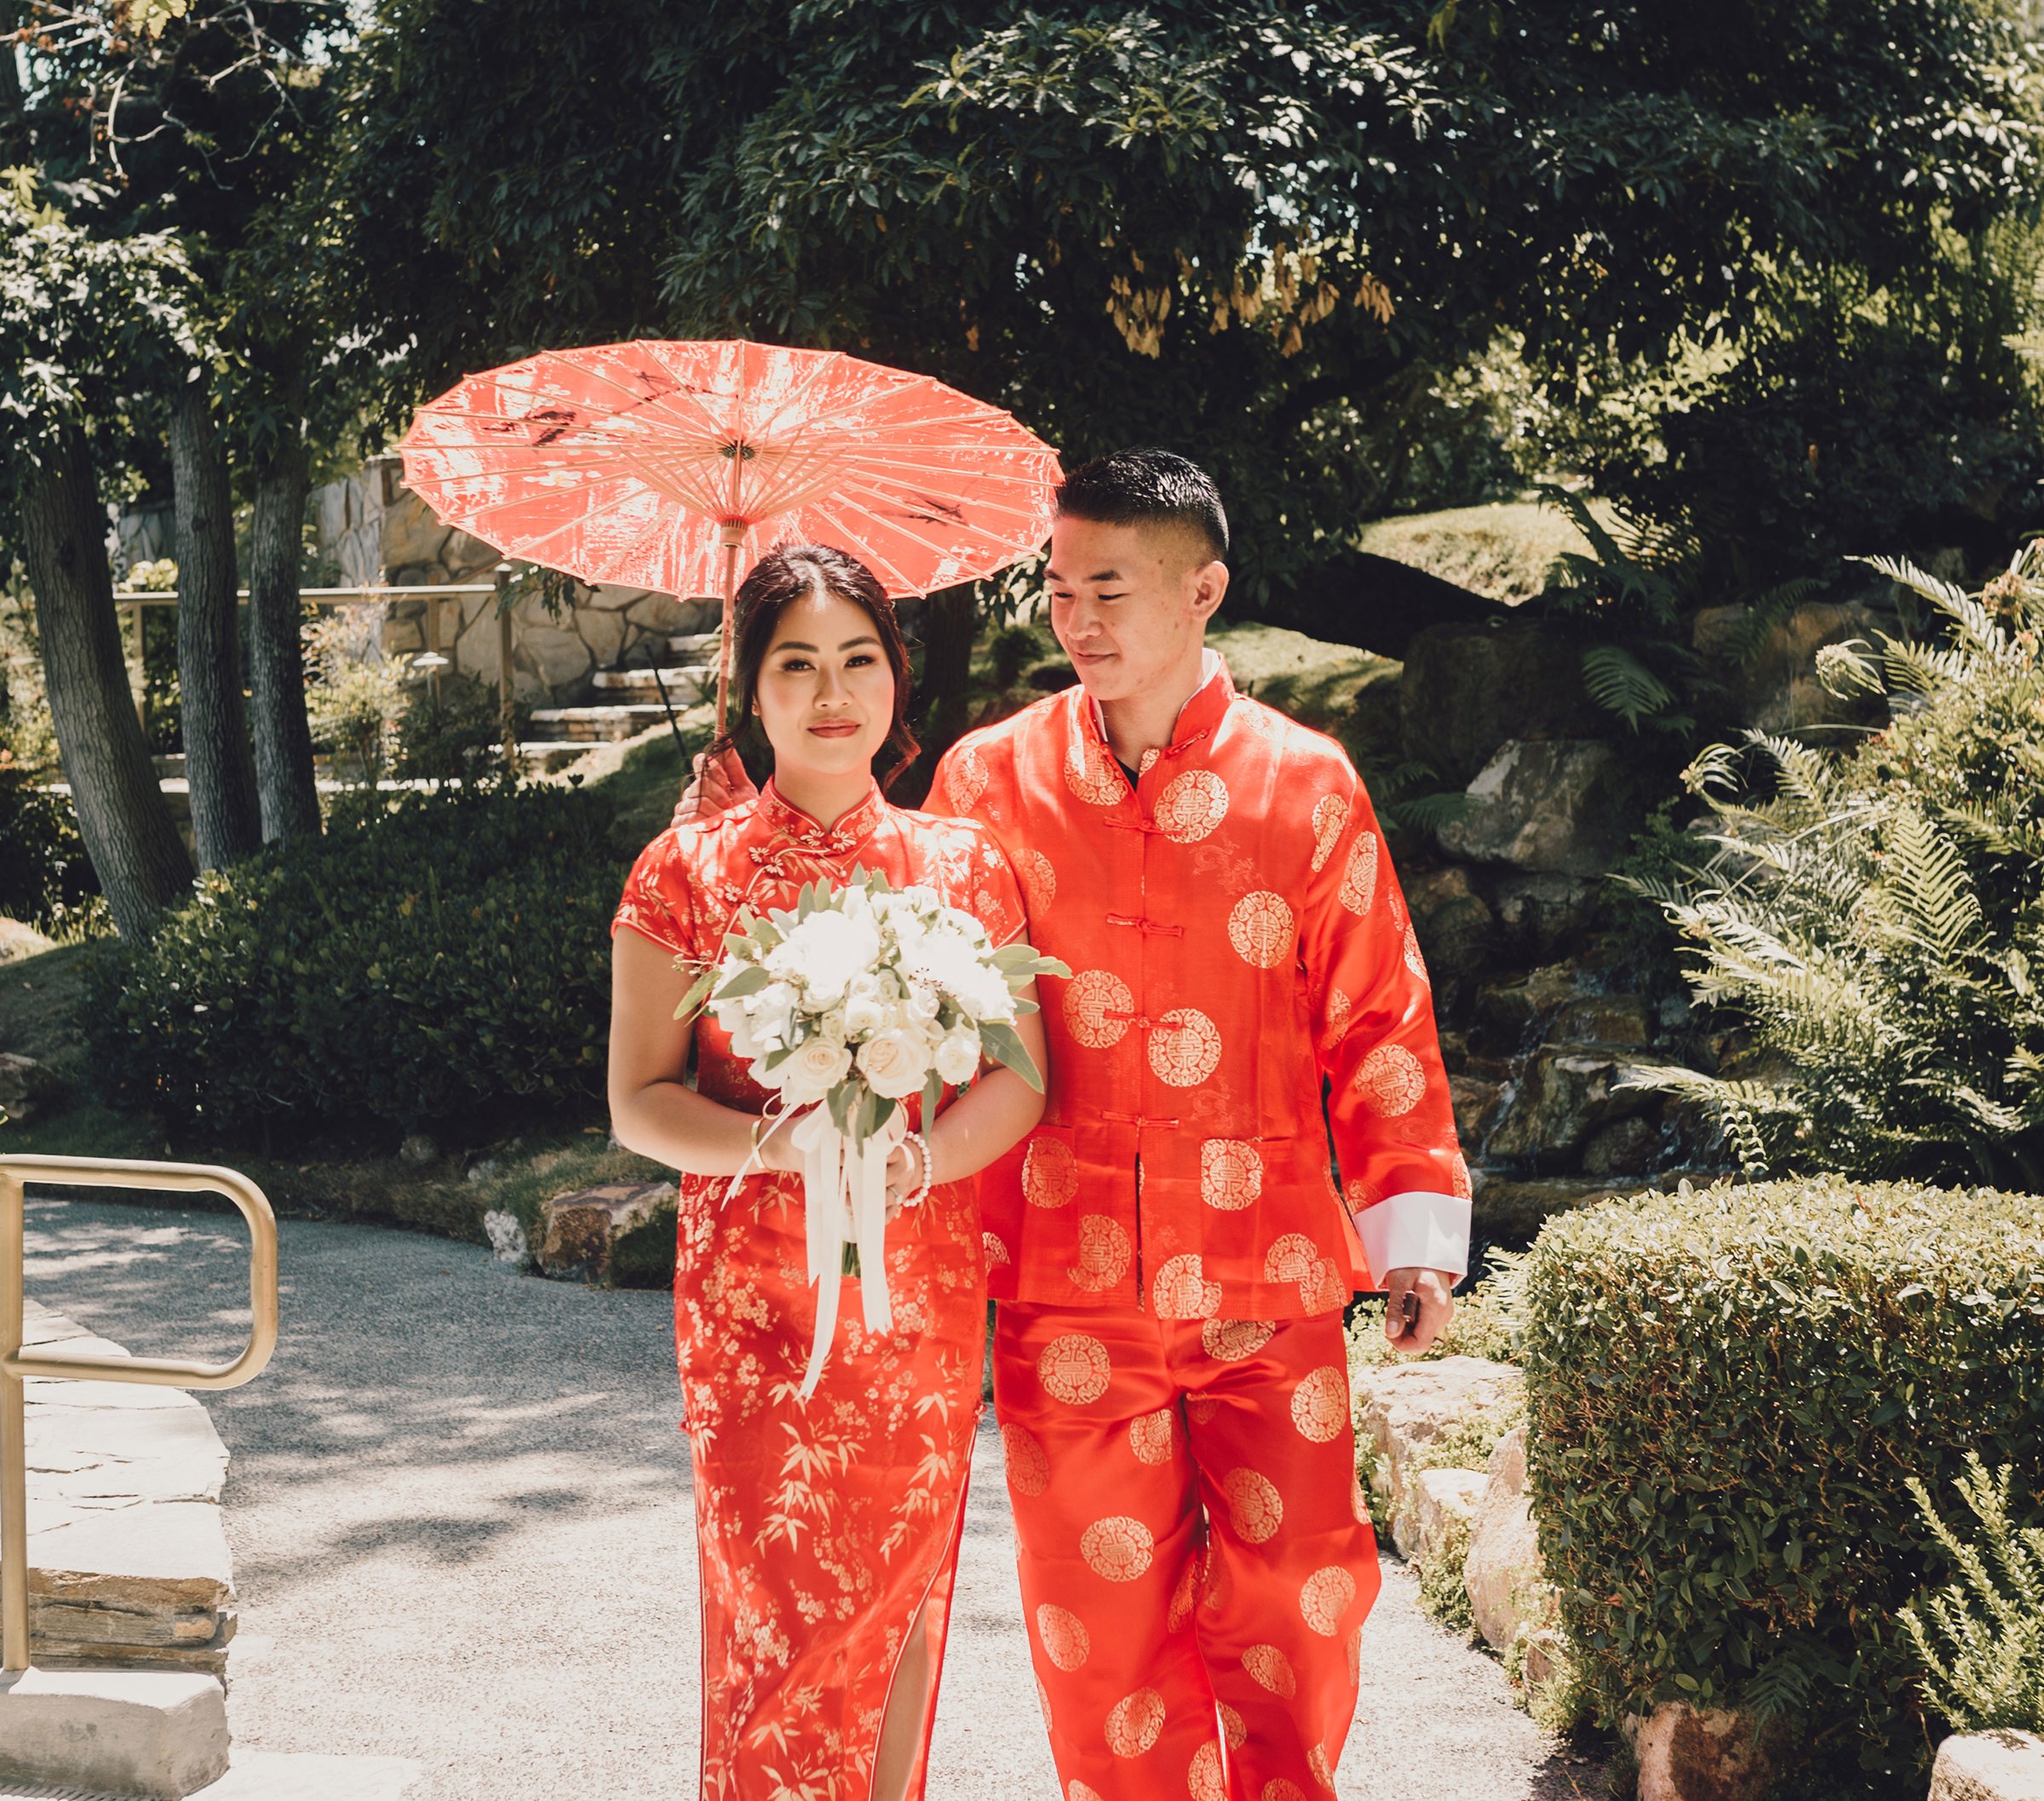 modern-asian-american-wedding-first-look-traditional-chinese-attire-socal-photographer-21.jpg